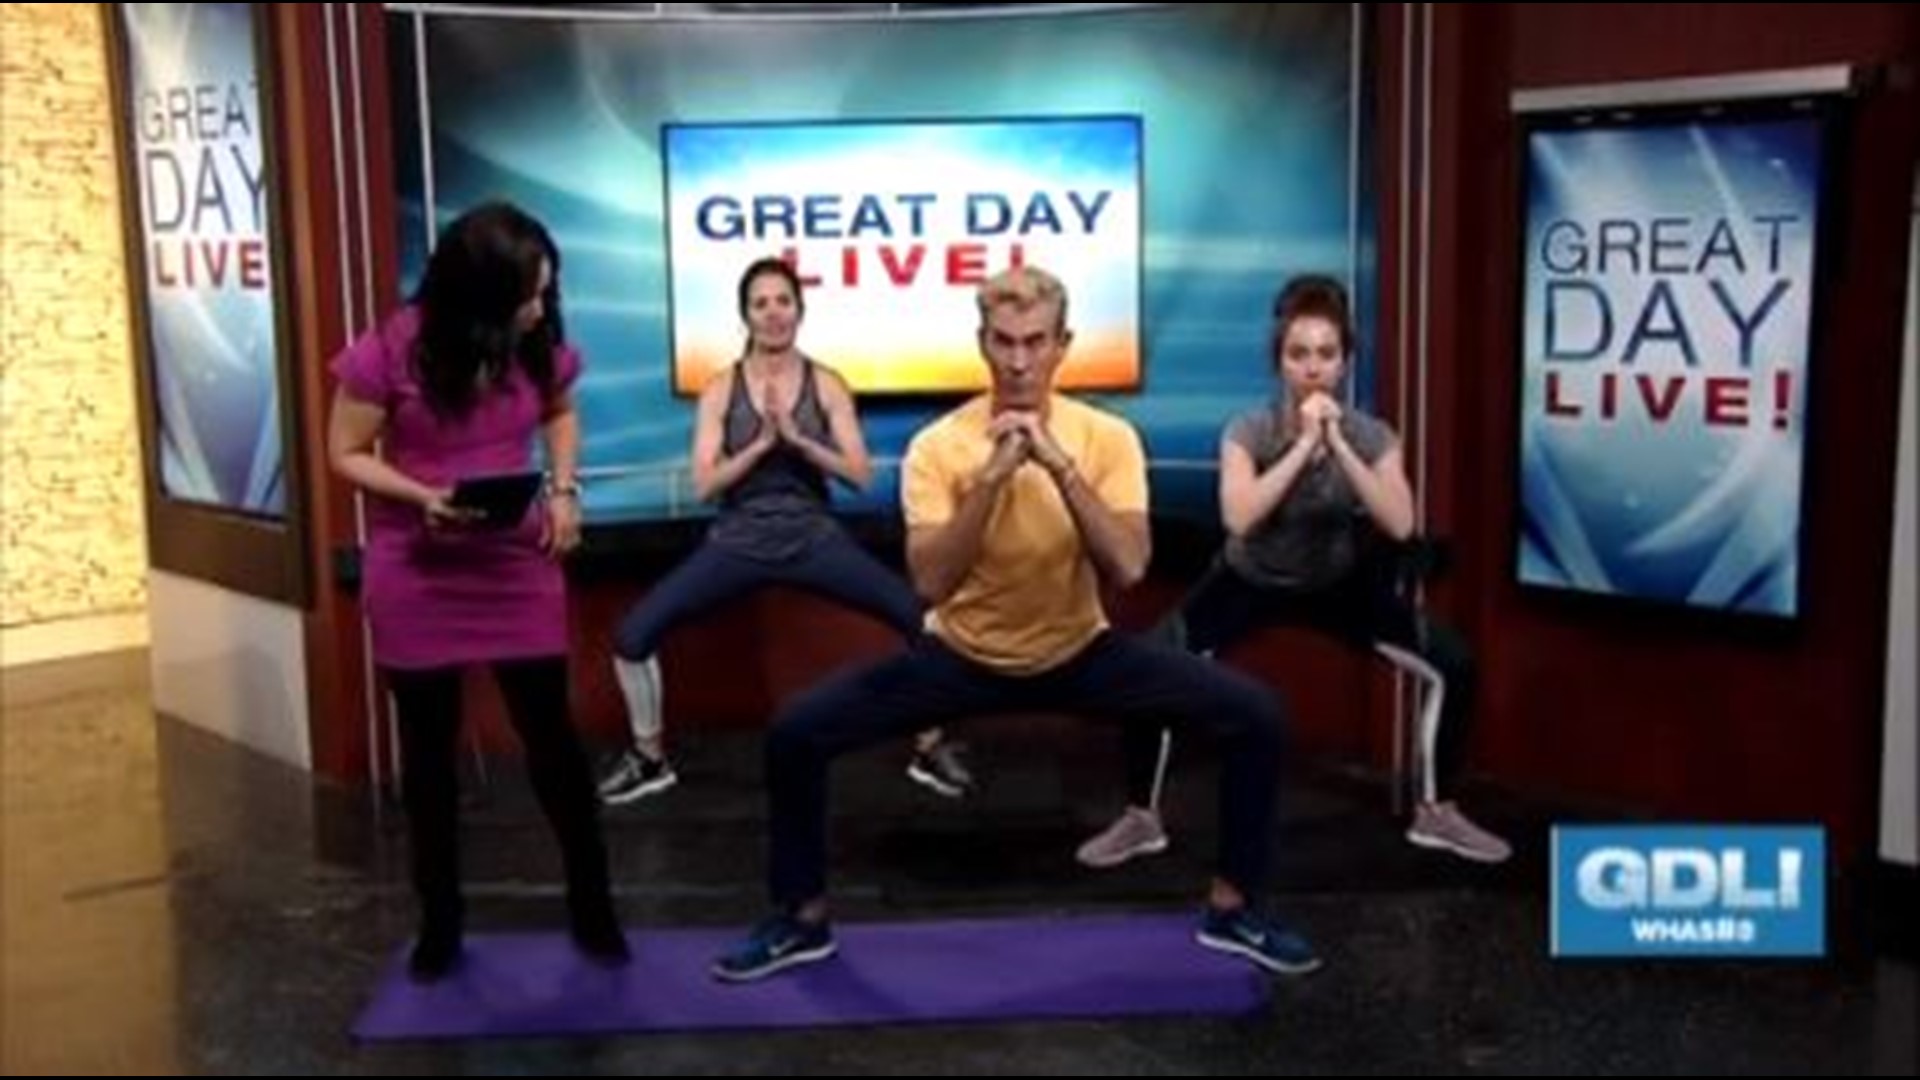 Fitness instructor Jeff Howard has appeared on The View, CNN, ABC and Oprah. He’s a trainer at Milestone Fitness and he stopped by Great Day Live to give some tips on how to tone up your backside. You can take Jeff Howard's classes at Baptist Health's Milestone Wellness Center, which is located at 750 Cypress Station Drive in Louisville, KY. For more information, go to BaptistMilestone.com.